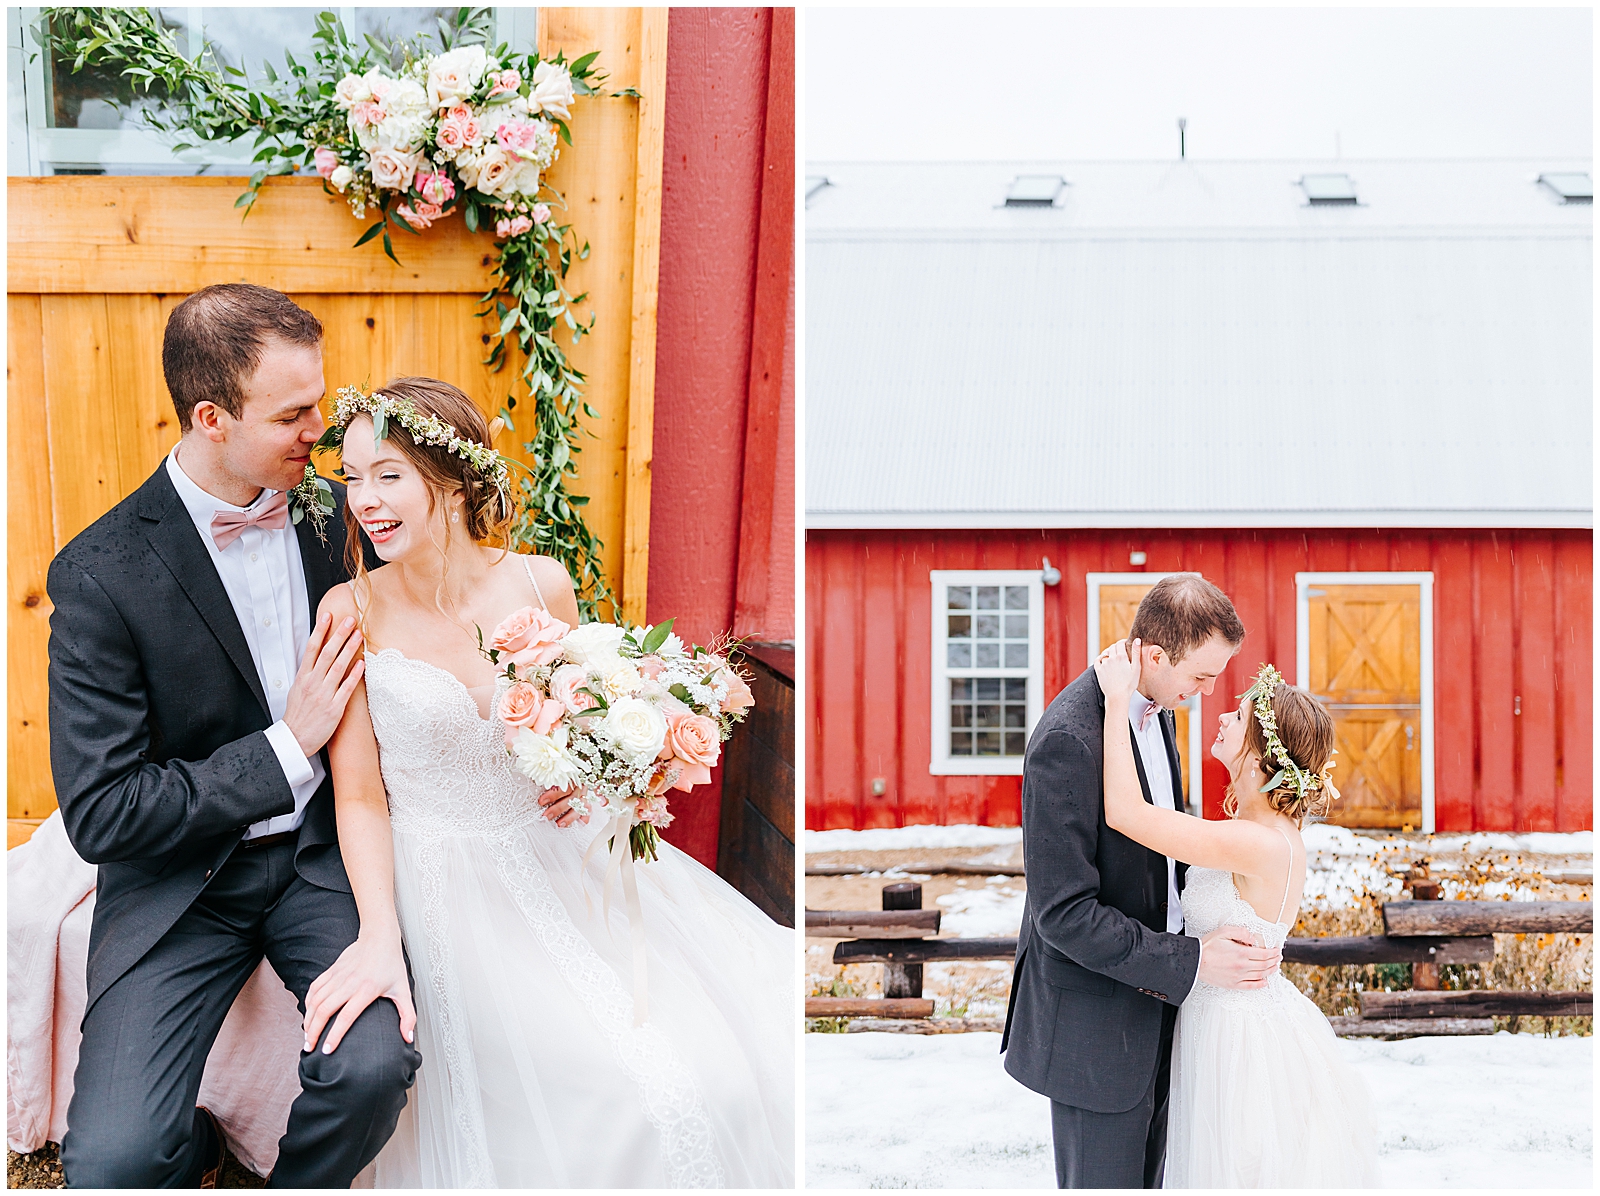 Fall Snowy Wedding at Sixty chapel Red Barn Bride and Groom Portraits